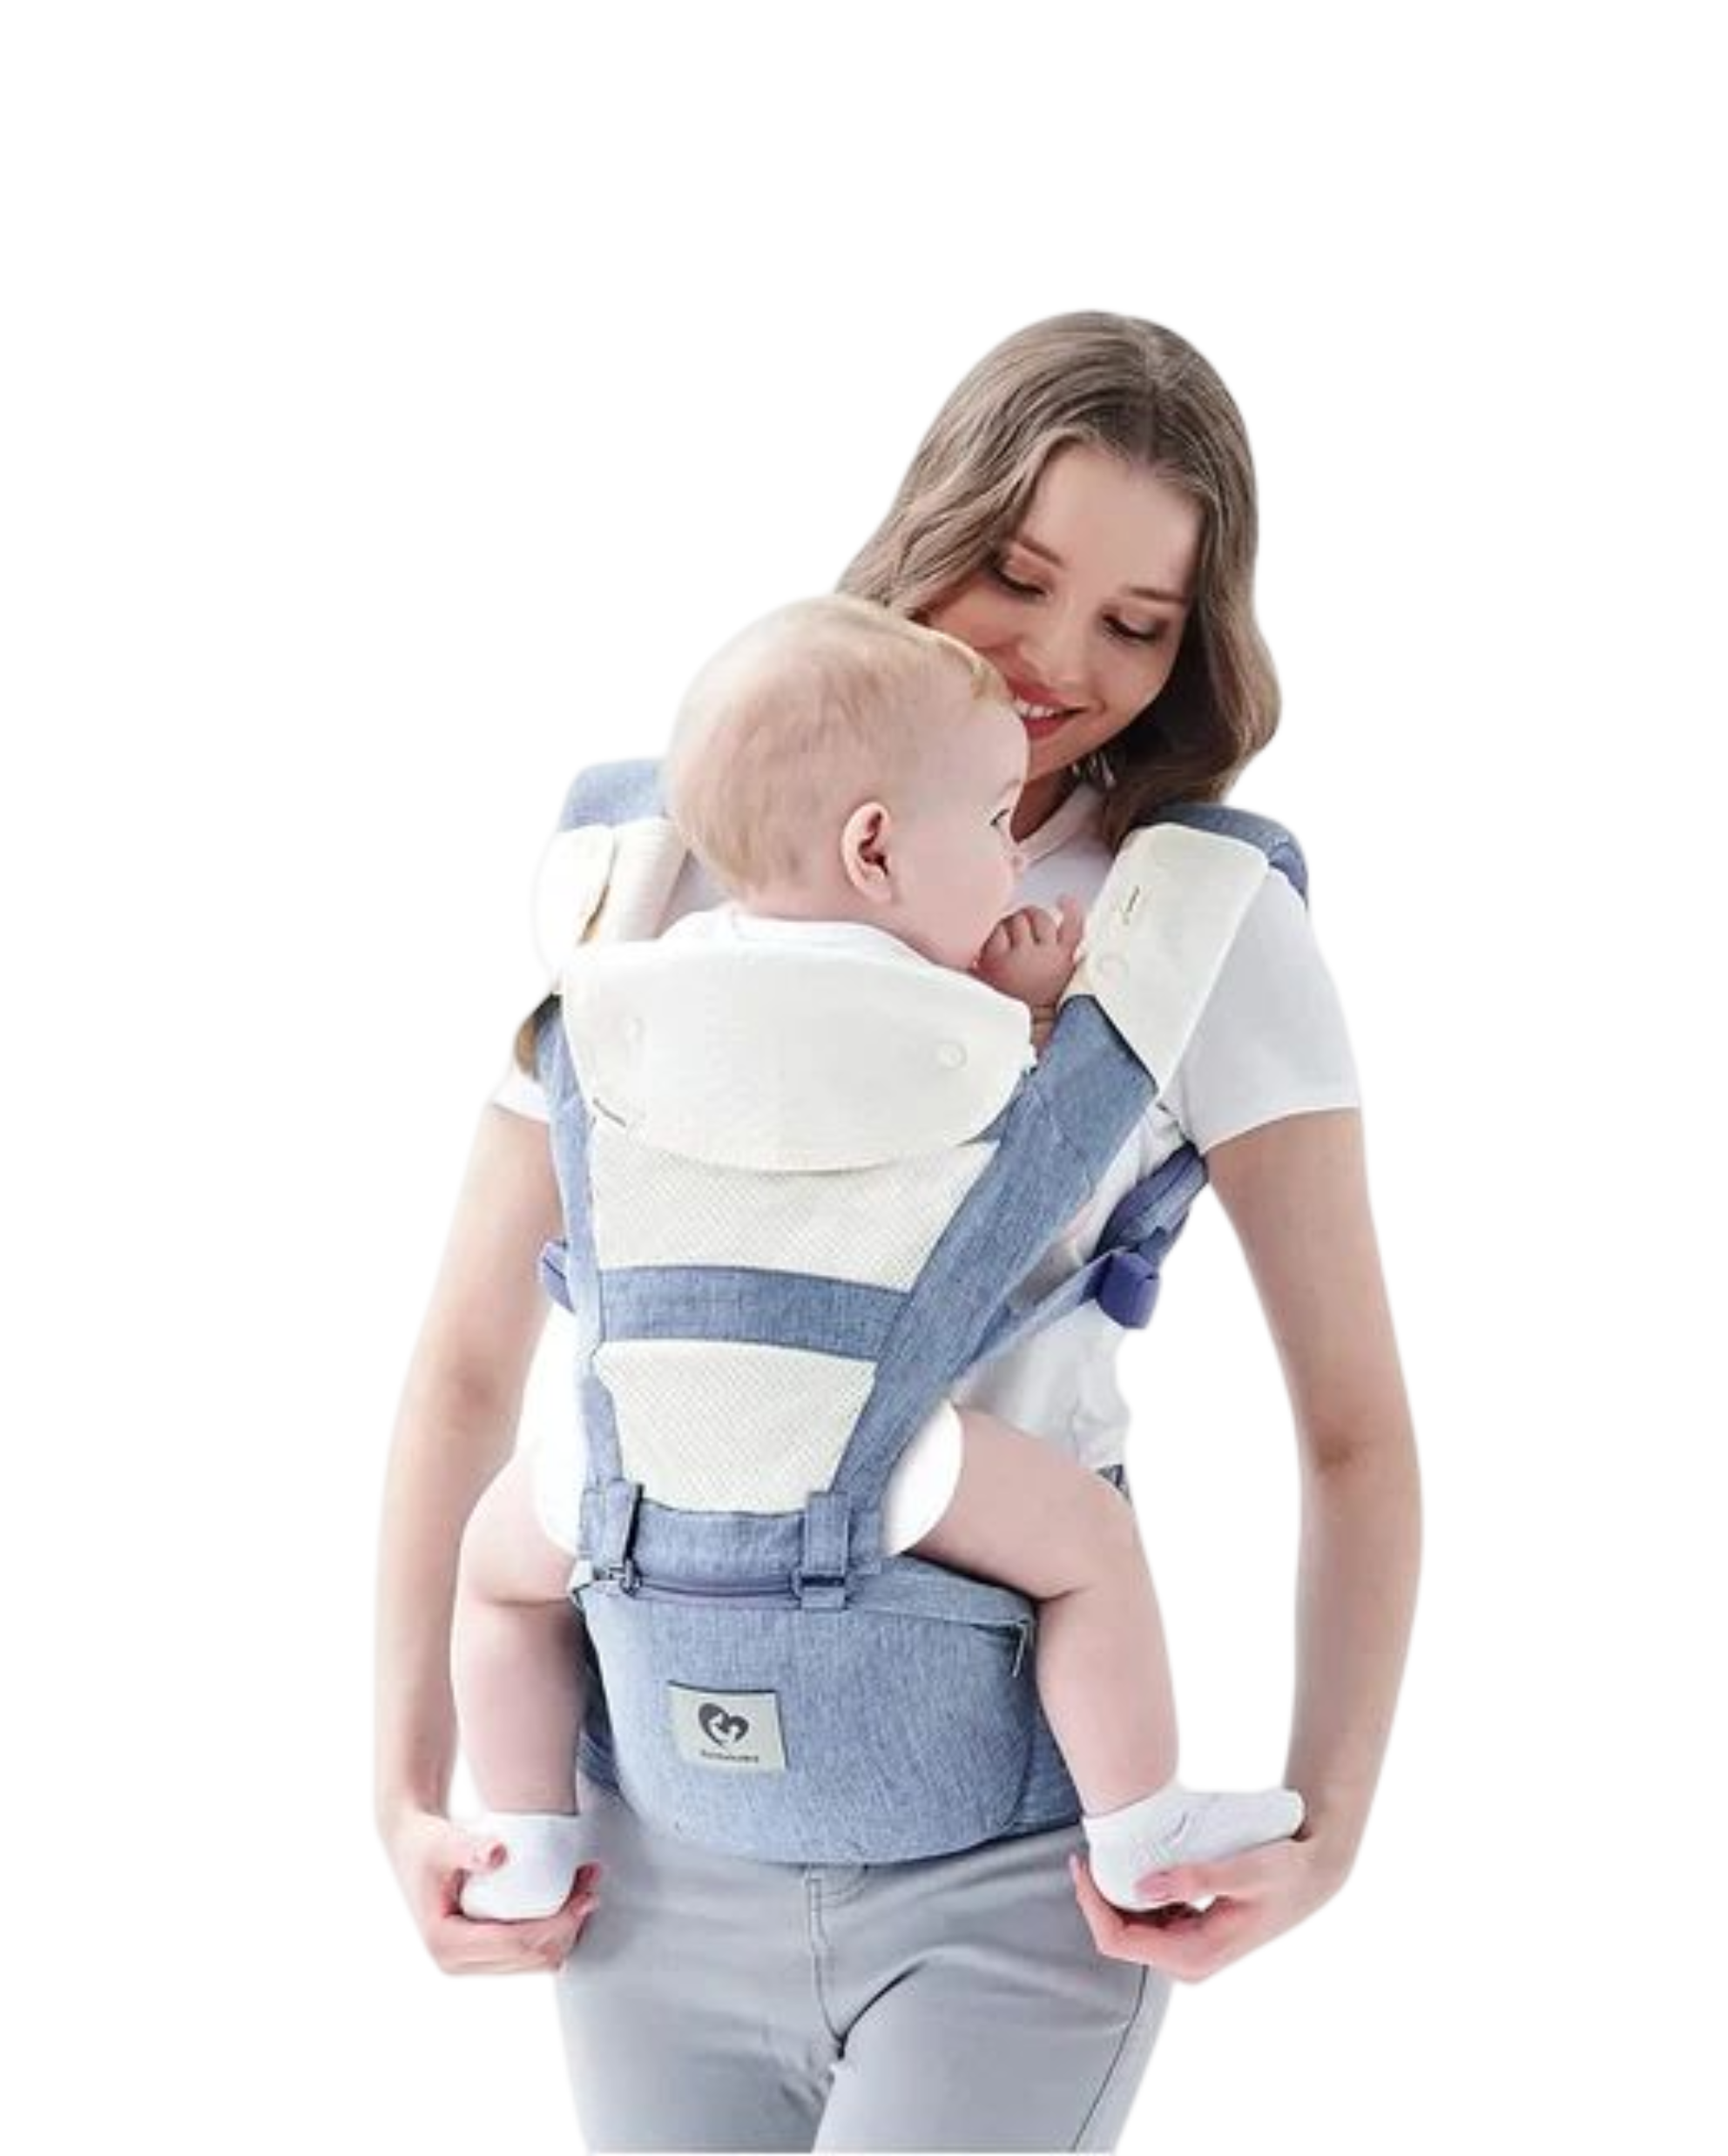 Baby Carriers & Other Equipment - International Hip Dysplasia